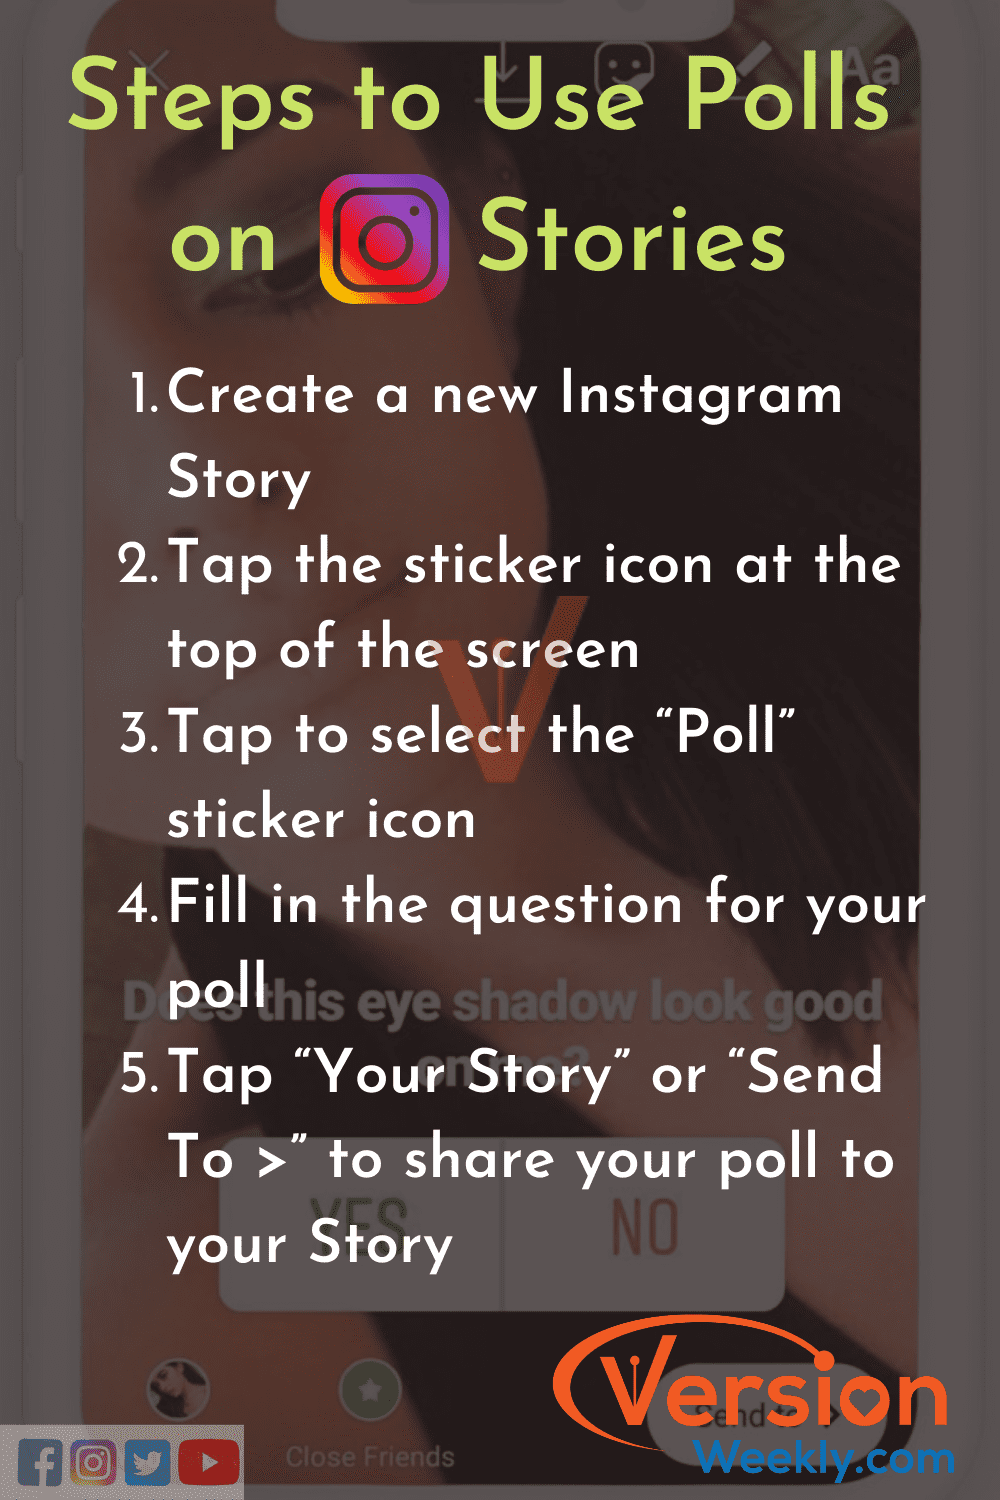 How to use poll on Instagram Stories